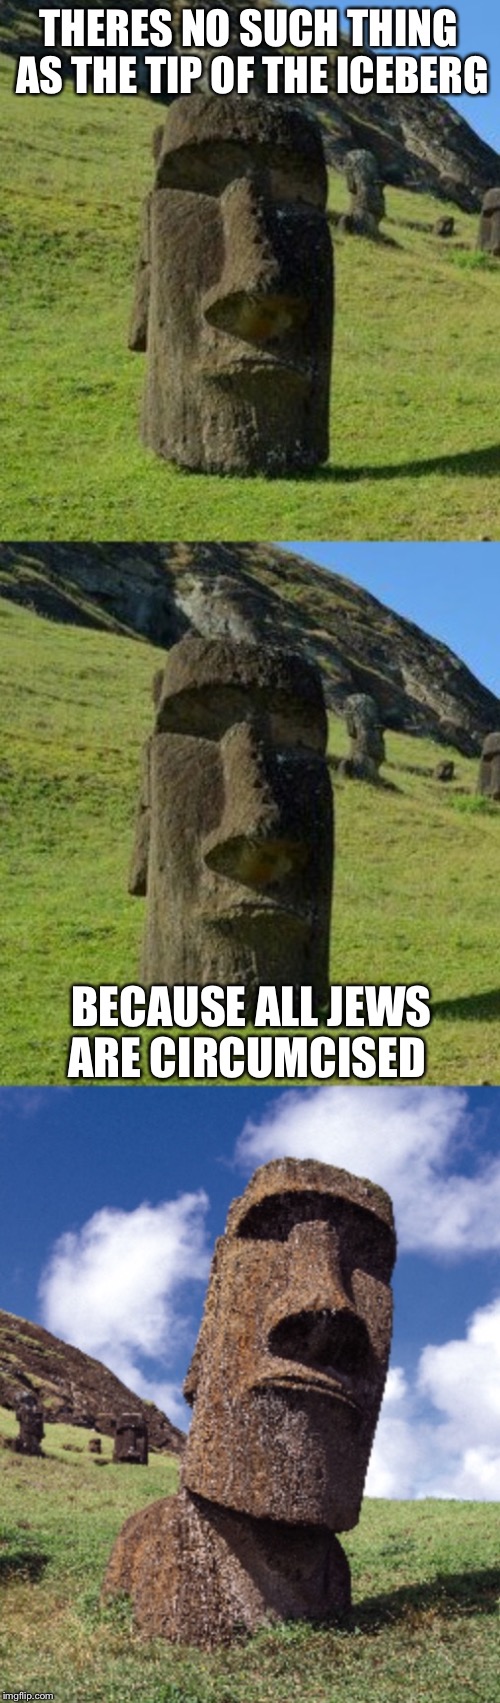 Bad Pun Moai | THERES NO SUCH THING AS THE TIP OF THE ICEBERG; BECAUSE ALL JEWS ARE CIRCUMCISED | image tagged in bad pun moai,bad puns,memes,funny | made w/ Imgflip meme maker